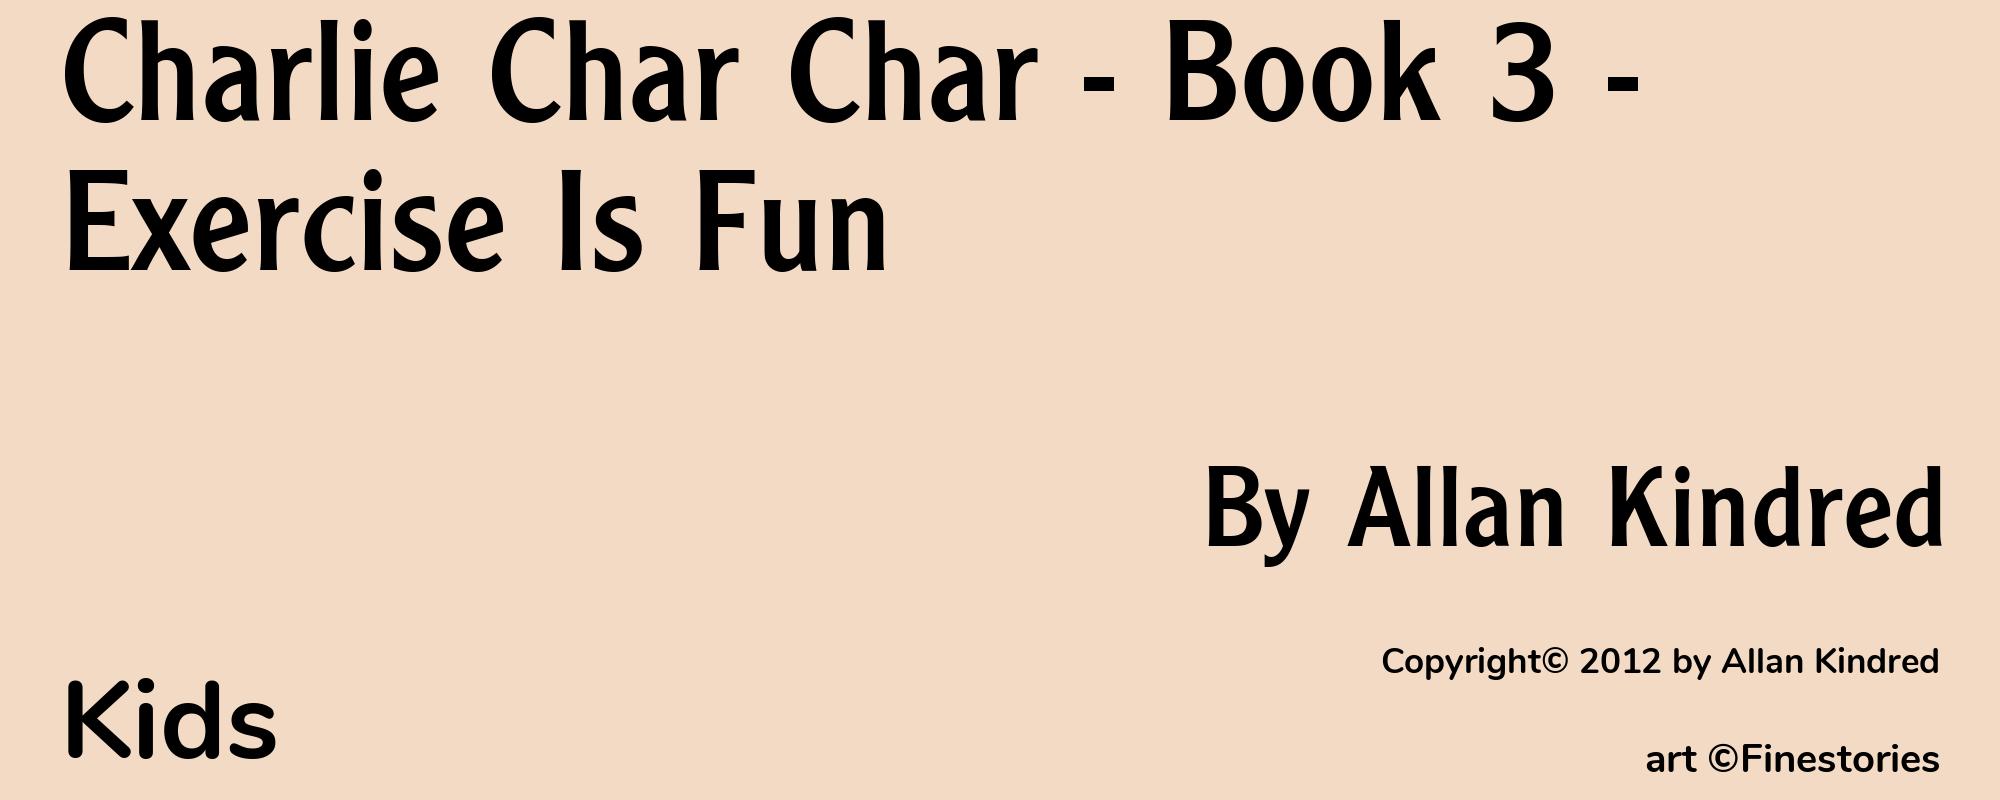 Charlie Char Char - Book 3 - Exercise Is Fun - Cover